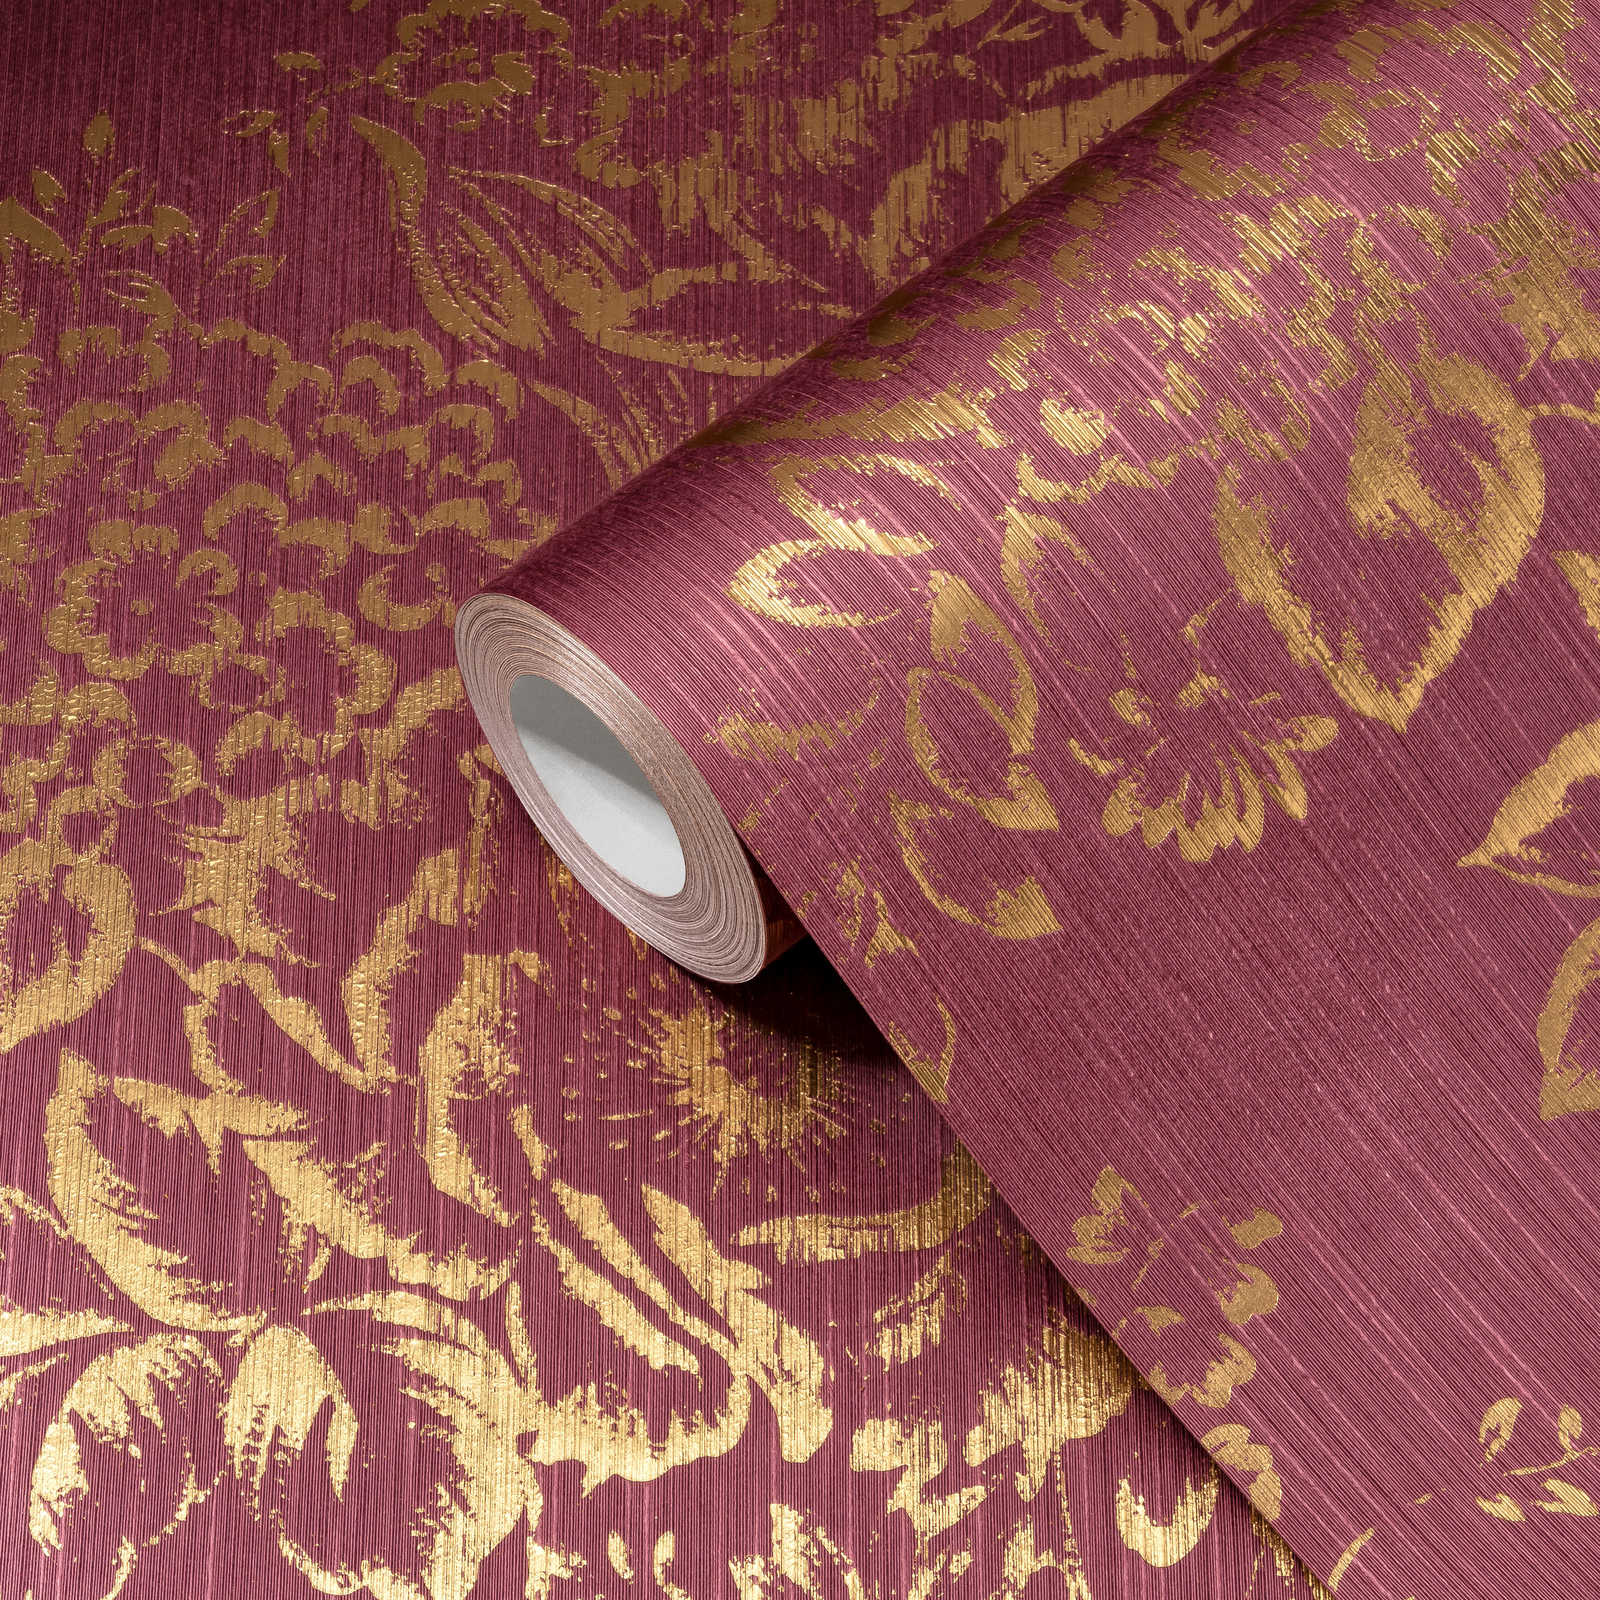             Textured wallpaper with golden floral pattern - gold, red
        